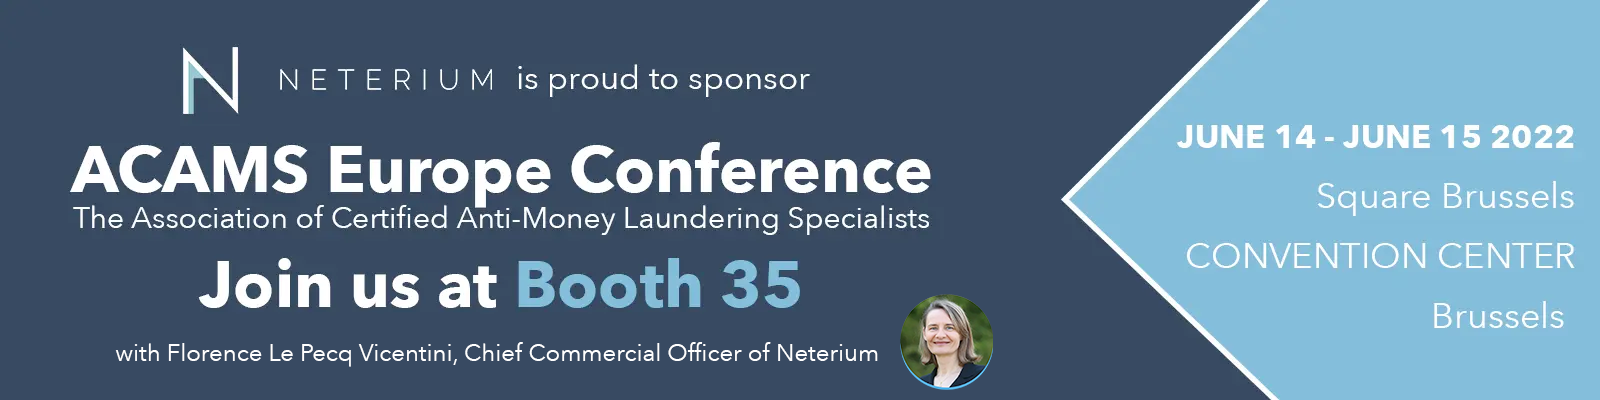 Neterium is attending and sponsoring ACAMS Europe